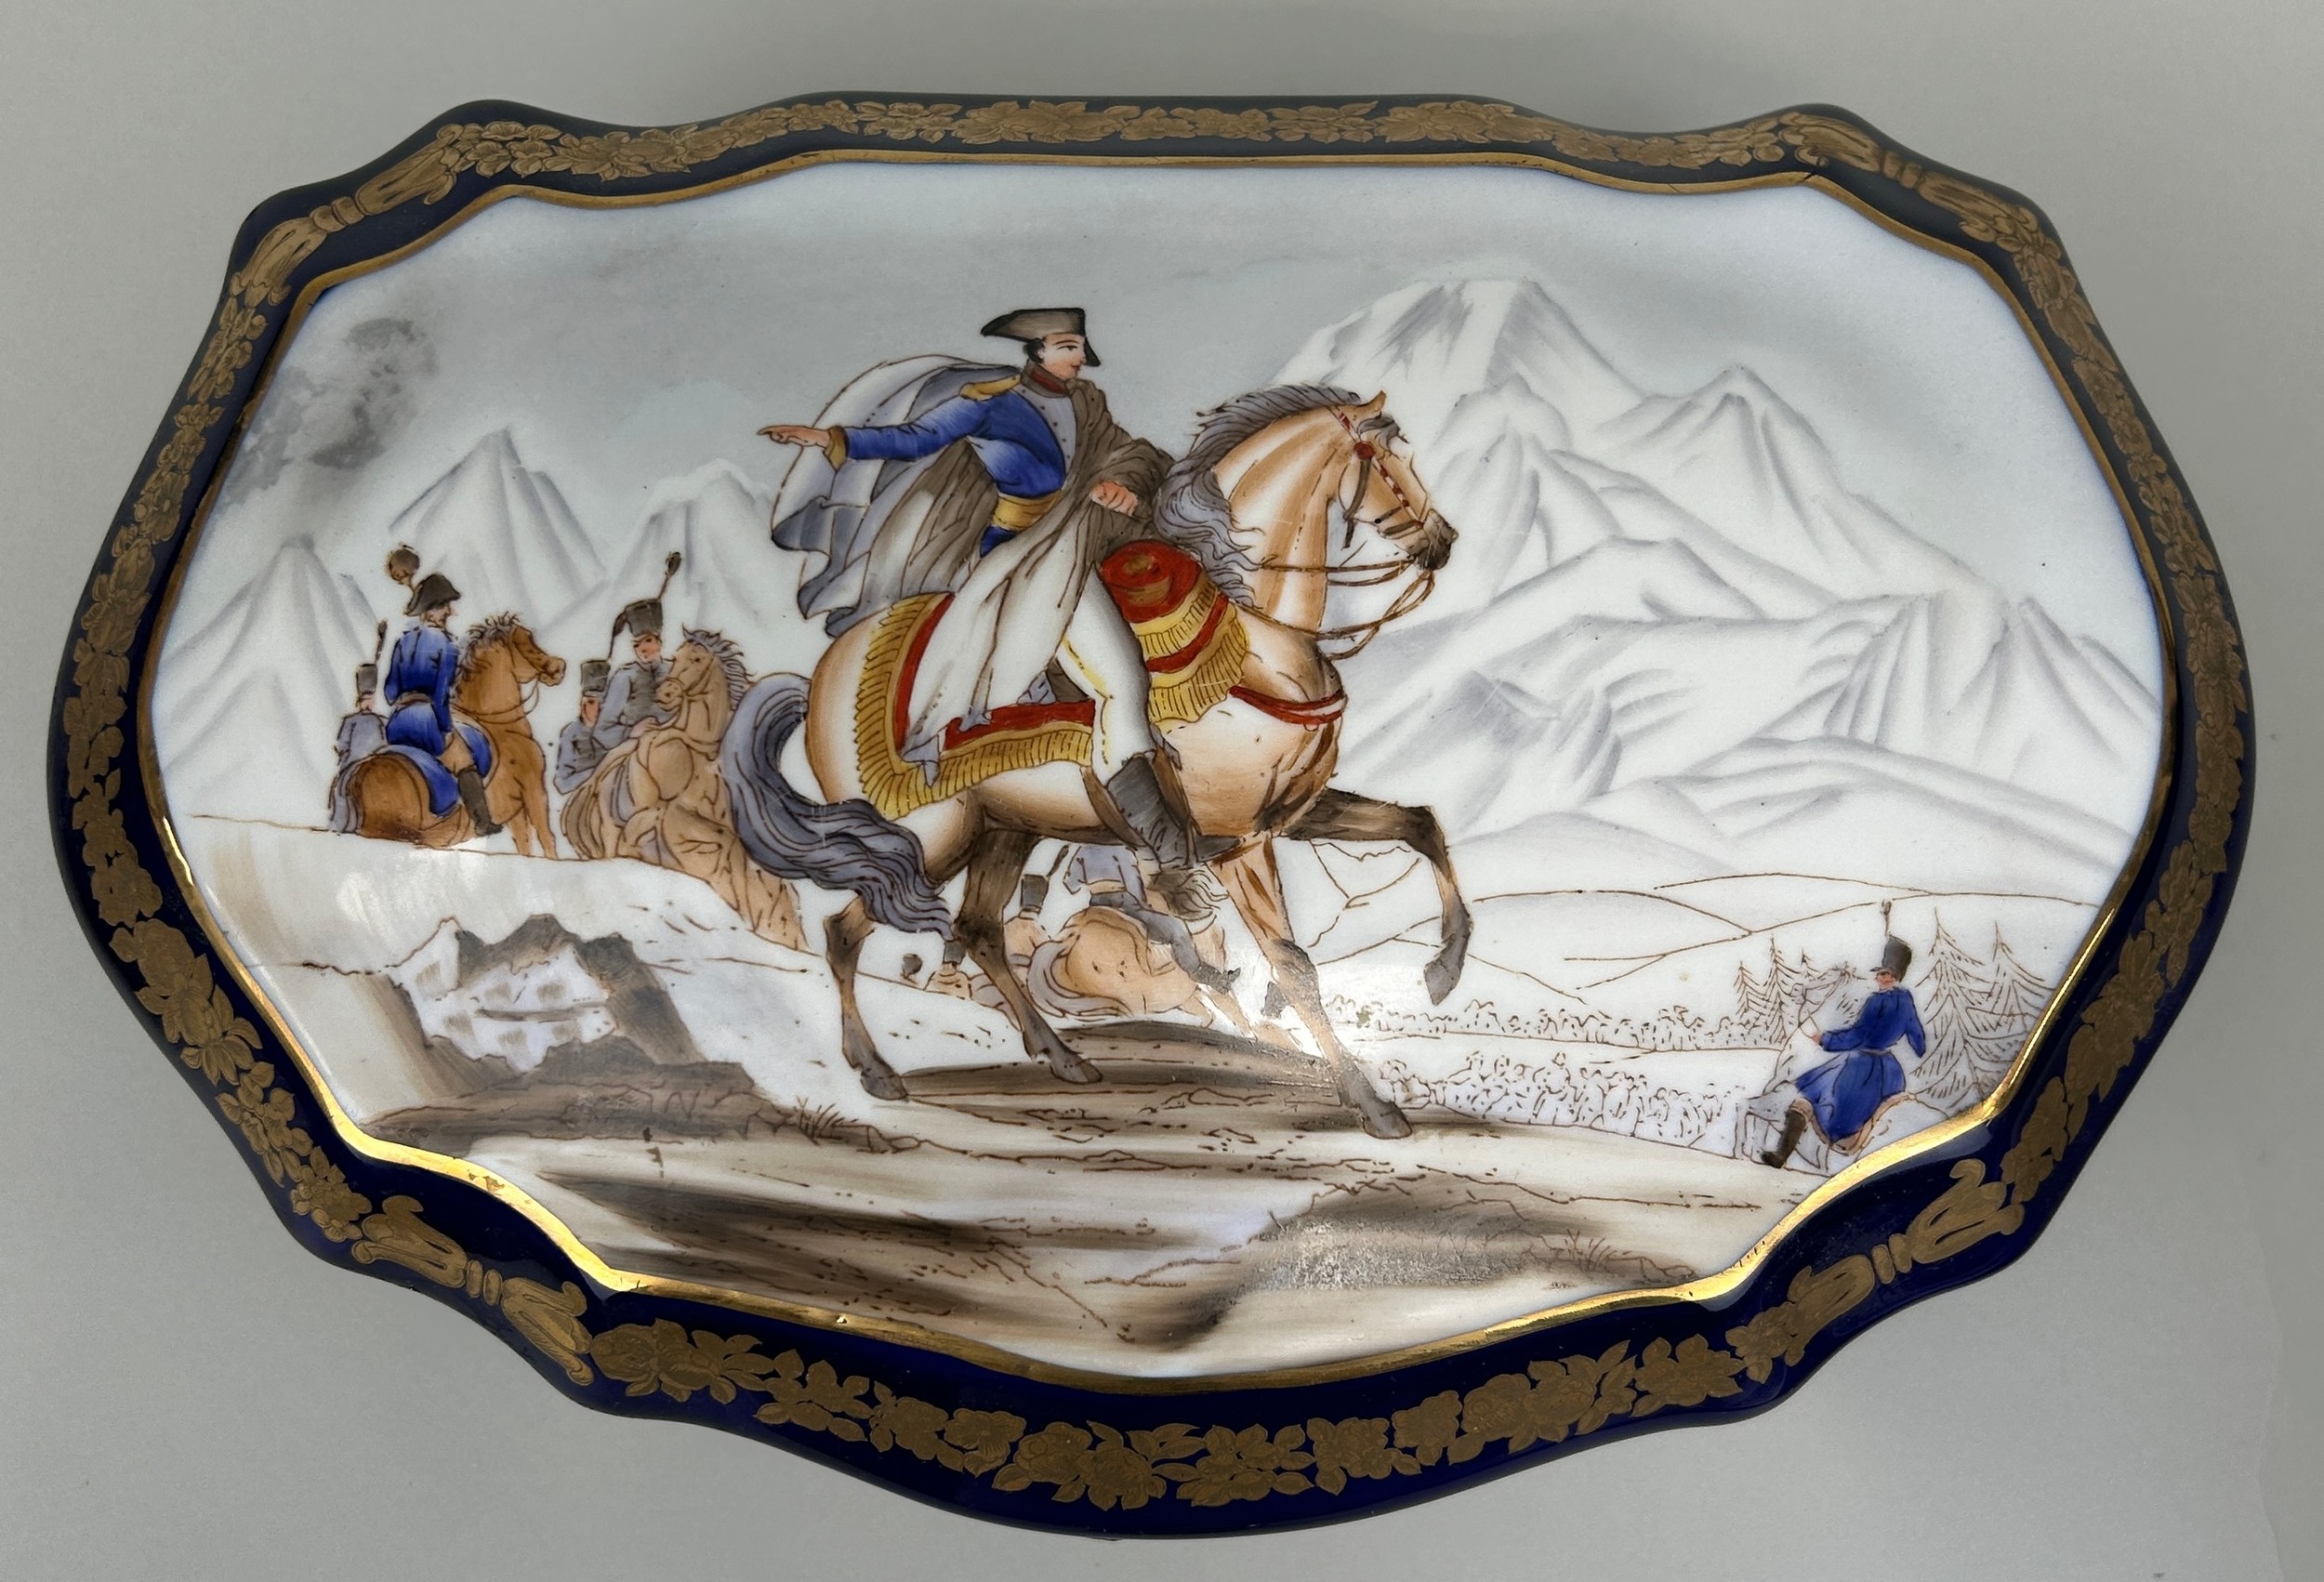 AFTER SEVRES: A SEVRES STYLE PORCELAIN BOX DECORATED WITH A HORSE AND RIDER, WITH GILT EAGLES.